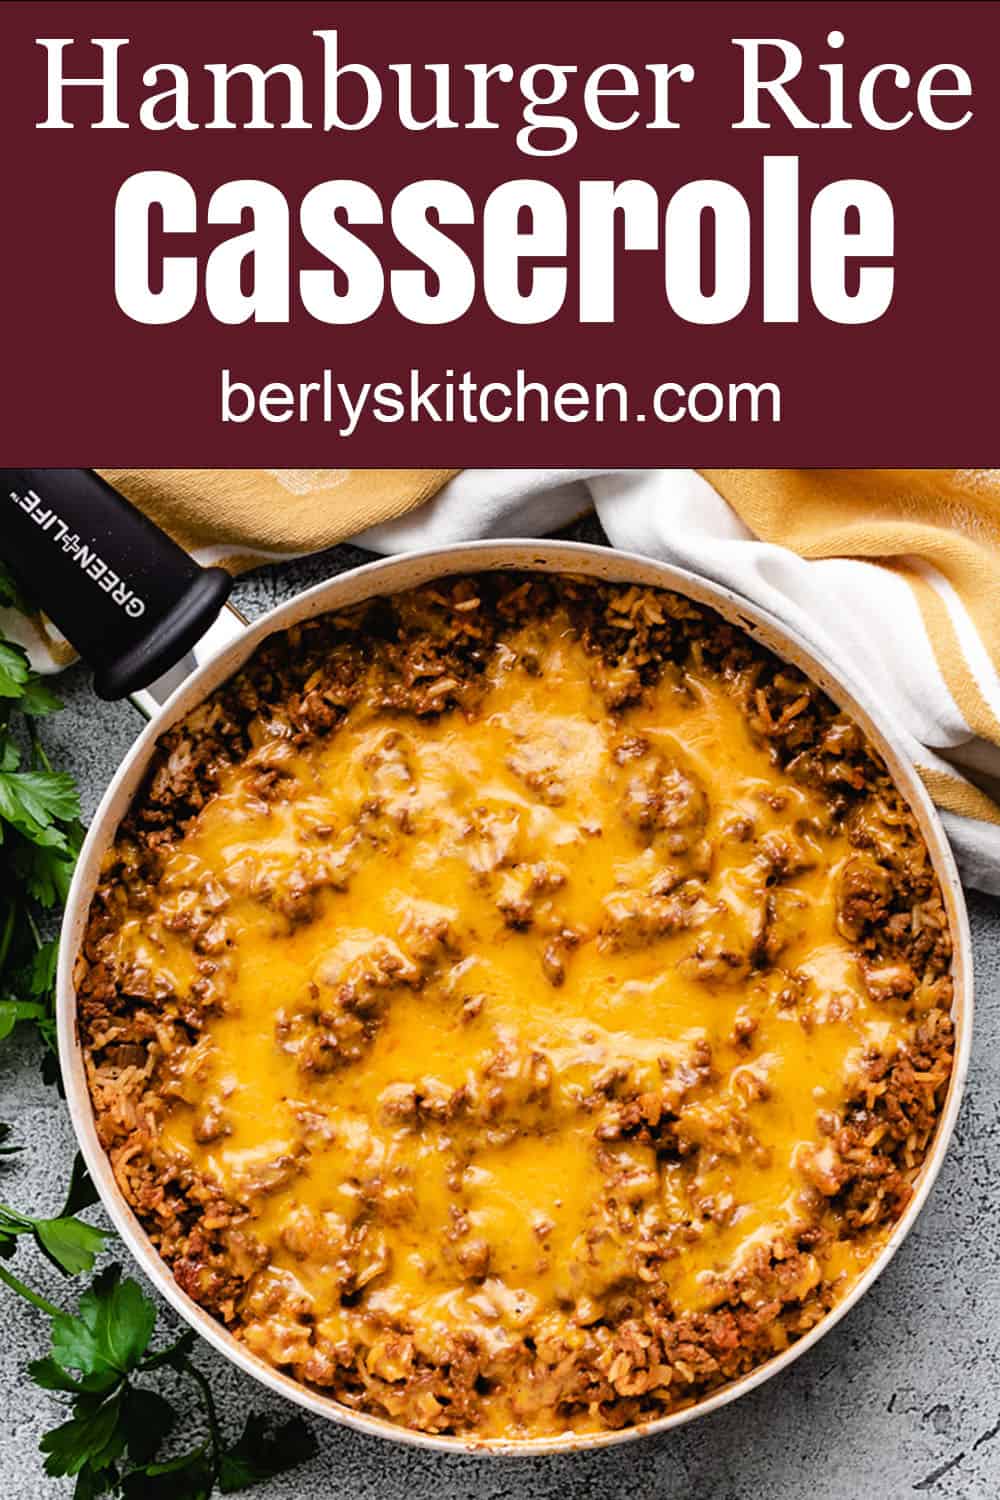 The Best Cheesy Beef and Rice Casserole - Womack Deabinder